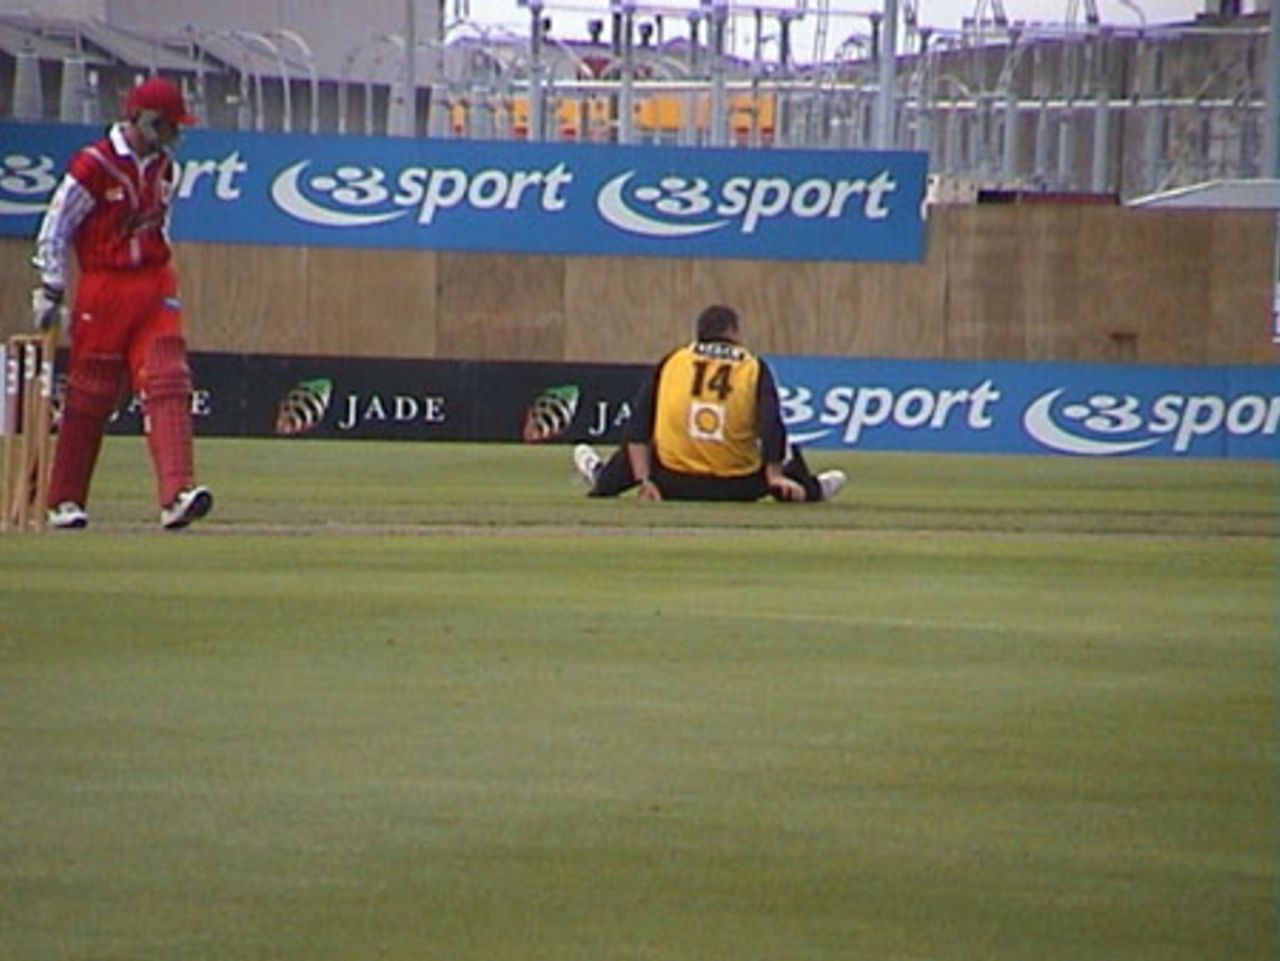 Wellington bowler Matthew Walker stretches in between overs while Canterbury batsman Gary Stead looks on, Shell Cup: Canterbury v Wellington at Jade Stadium, Christchurch, 18 January 2001